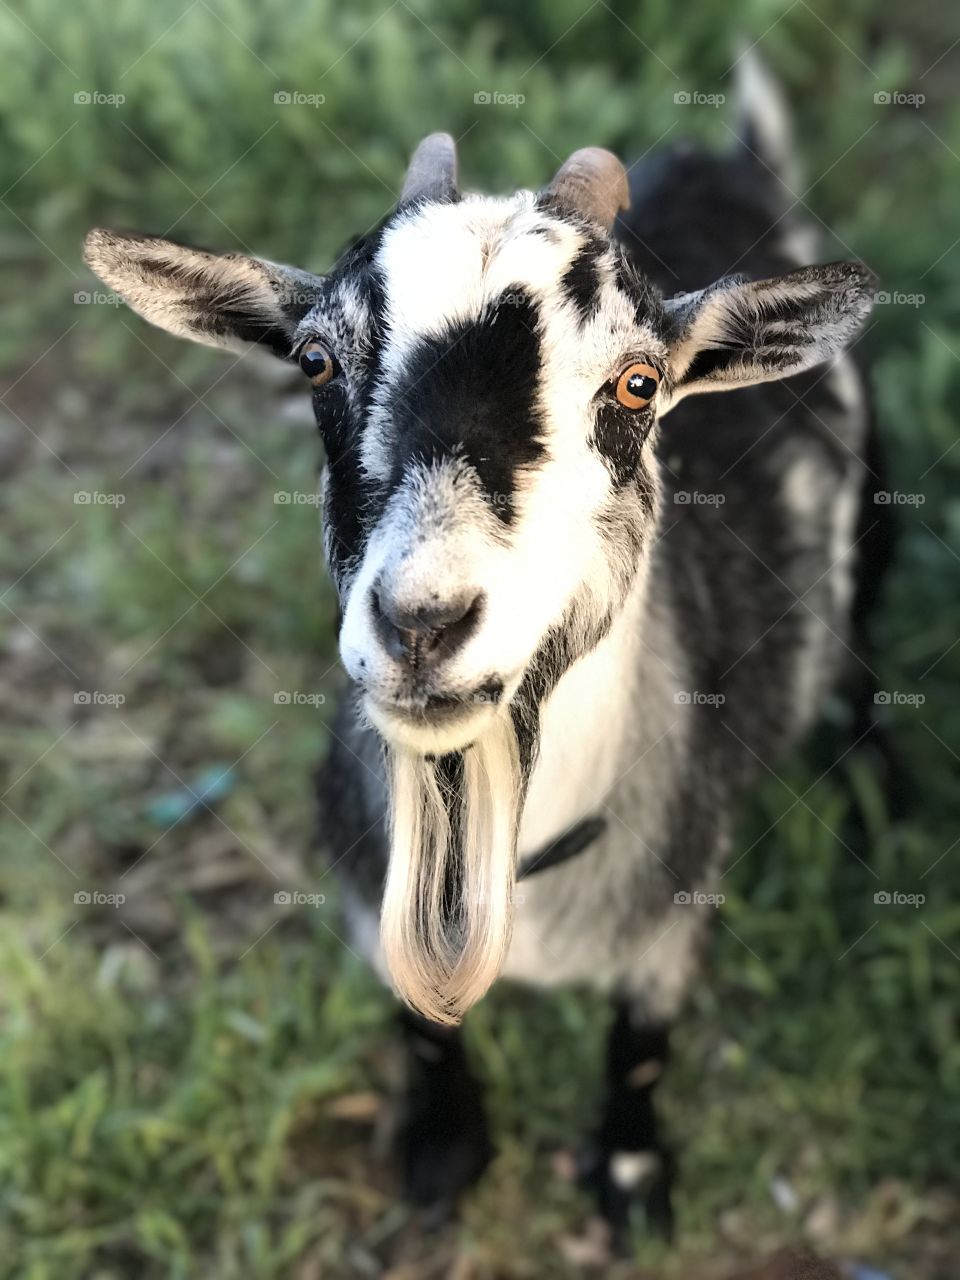 Our mama goat. 